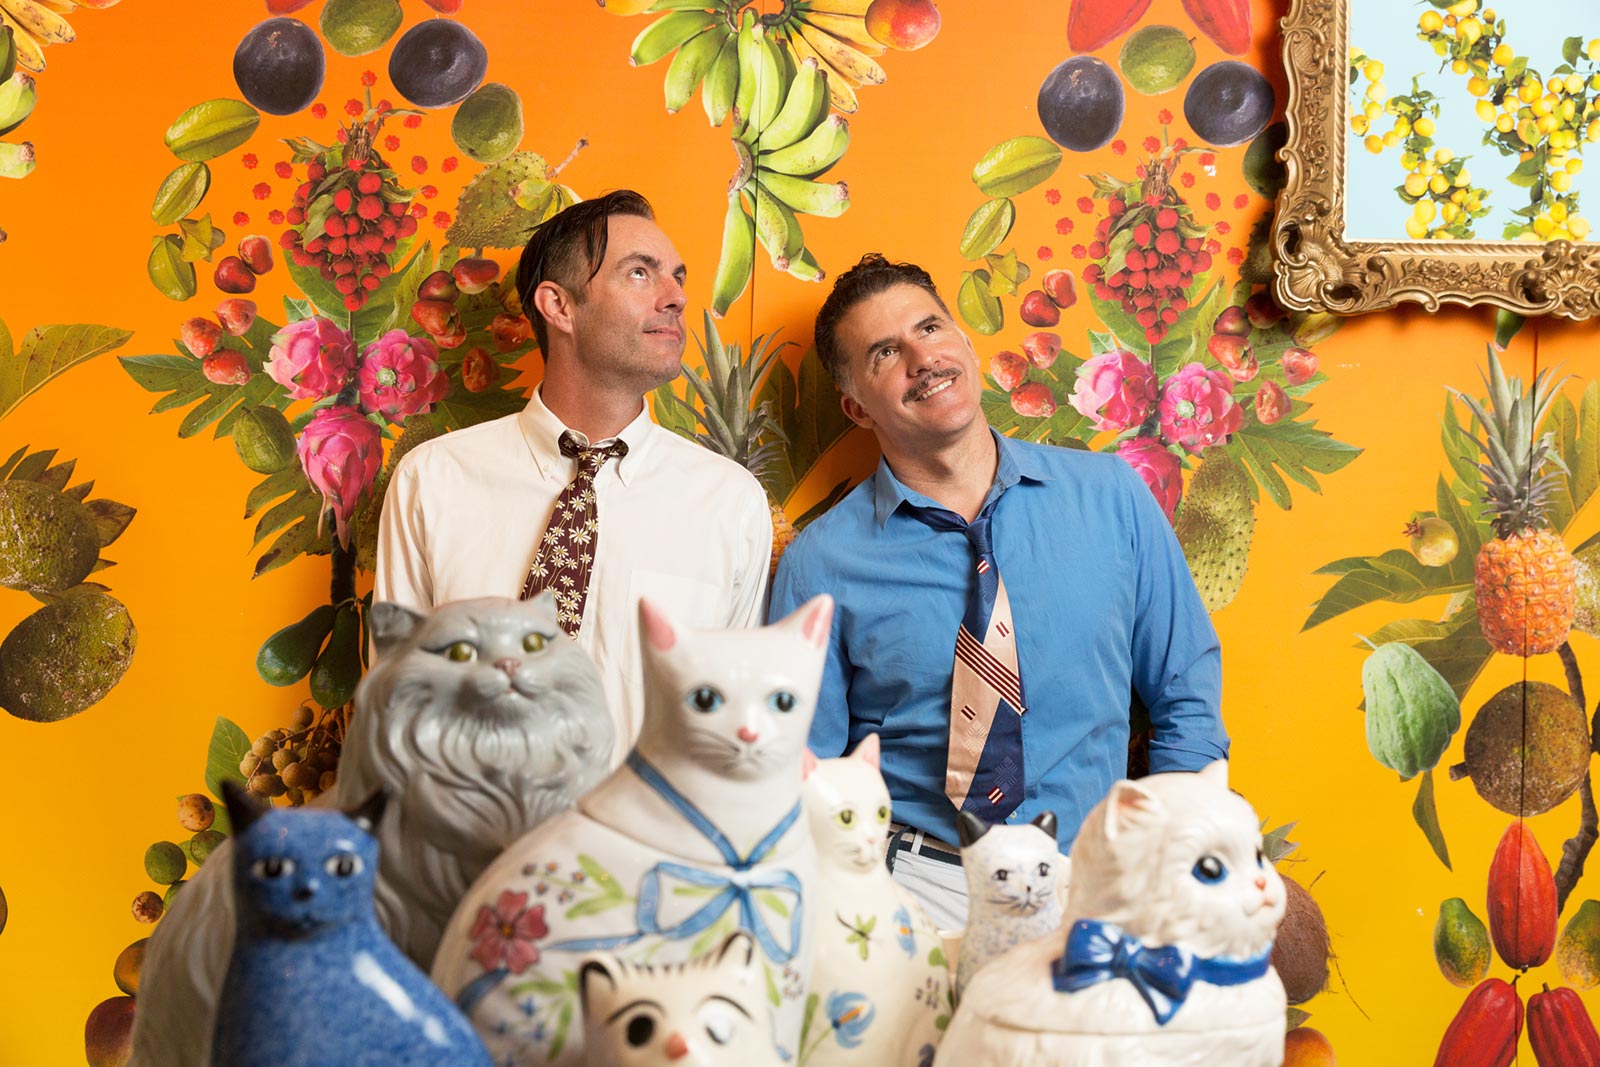 Portrait of David Allen Burns and Austin Young with cats, 2014. Photo credit: Jim Newberry